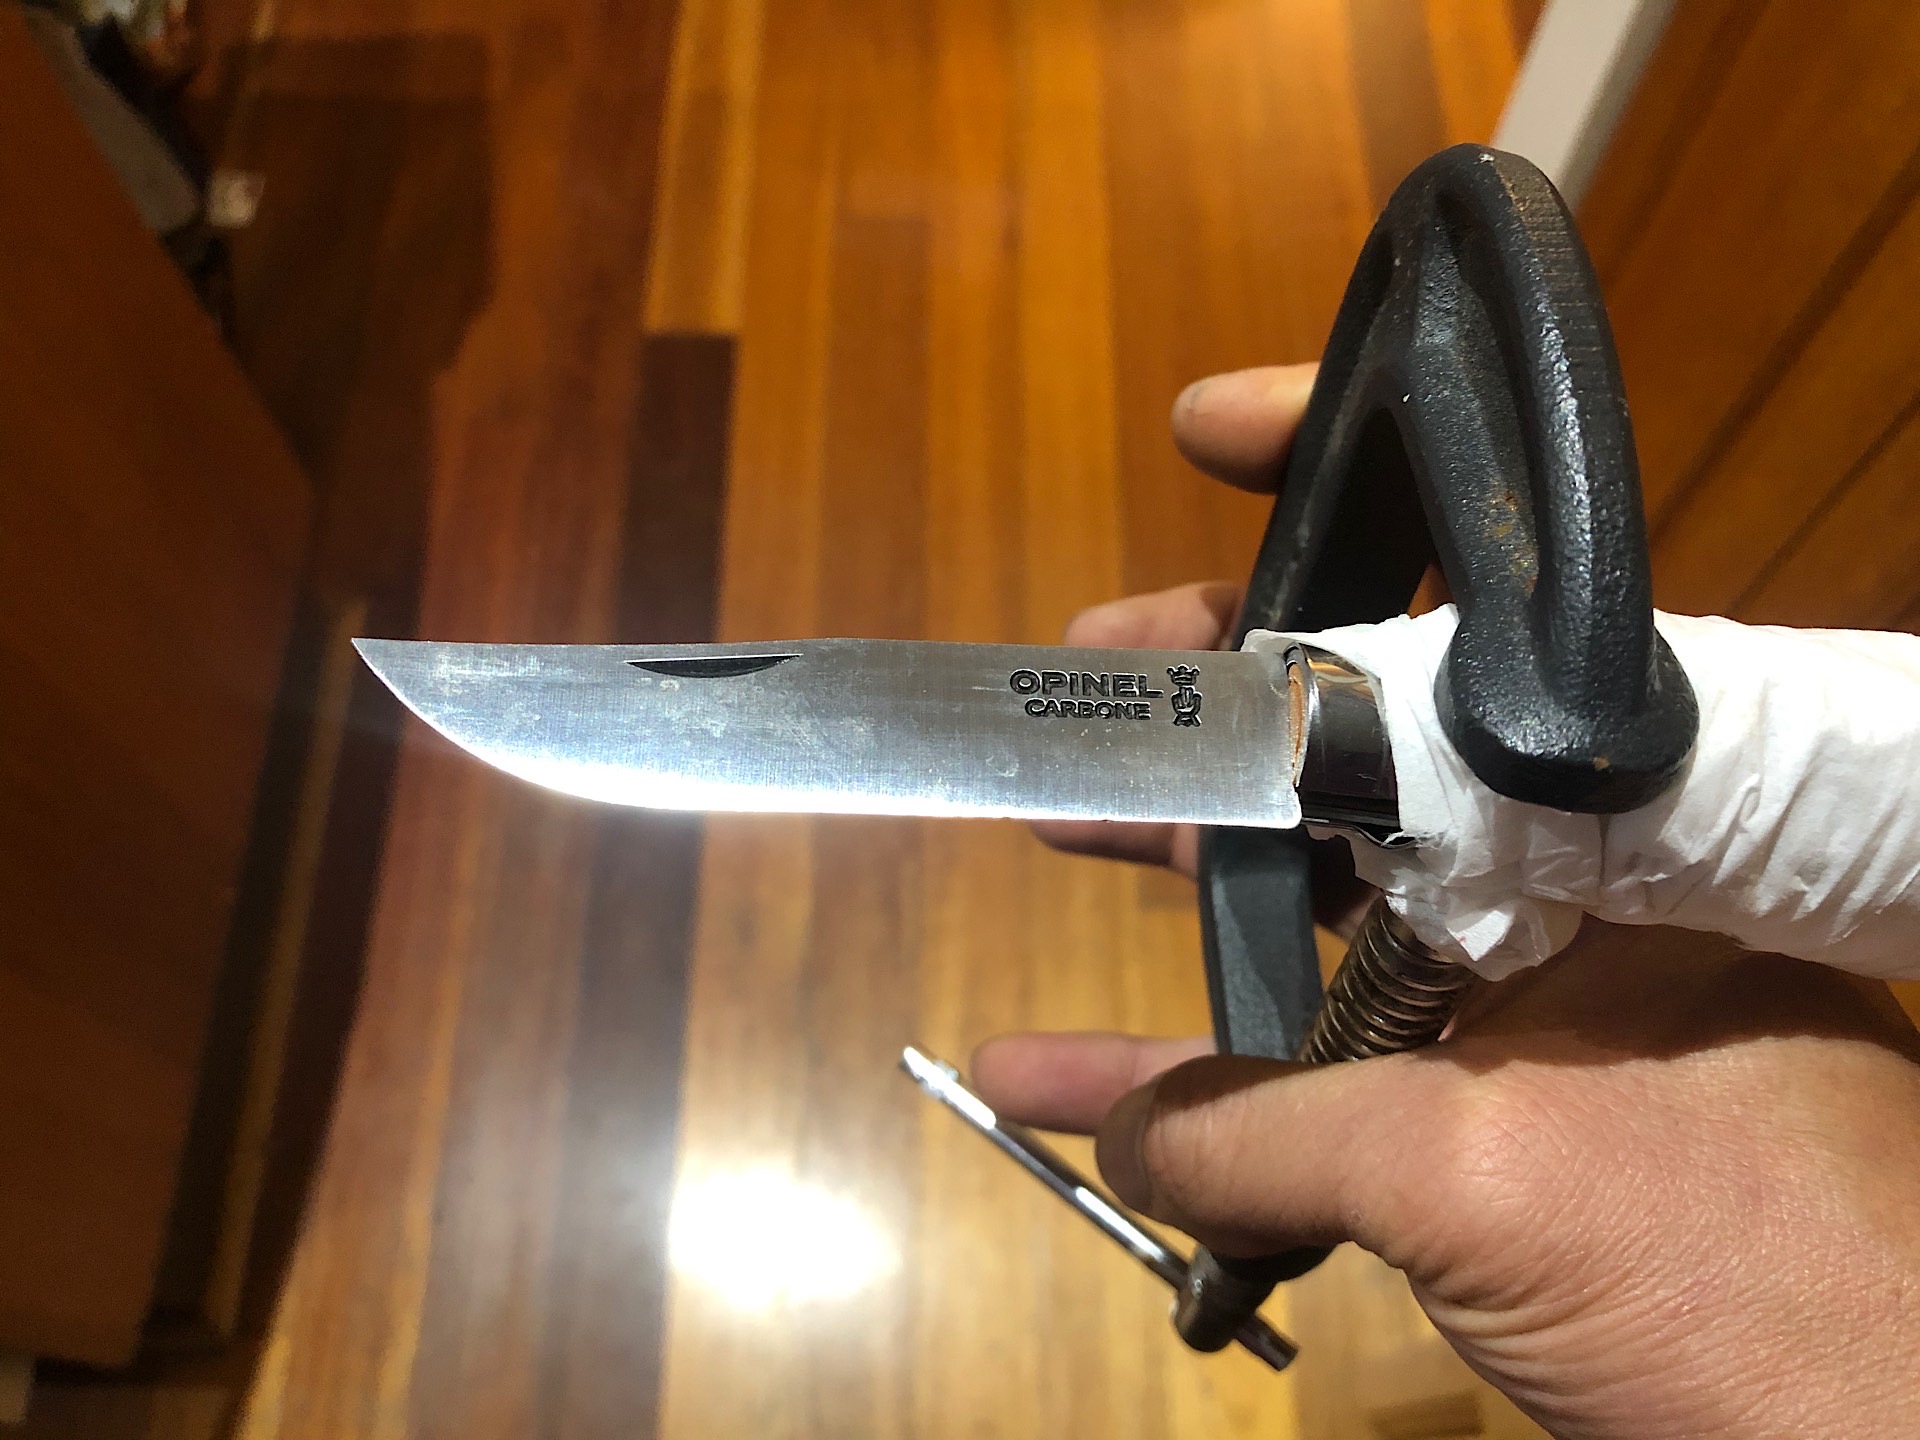 Using a clamp to suspend the Opinel blade in vinegar